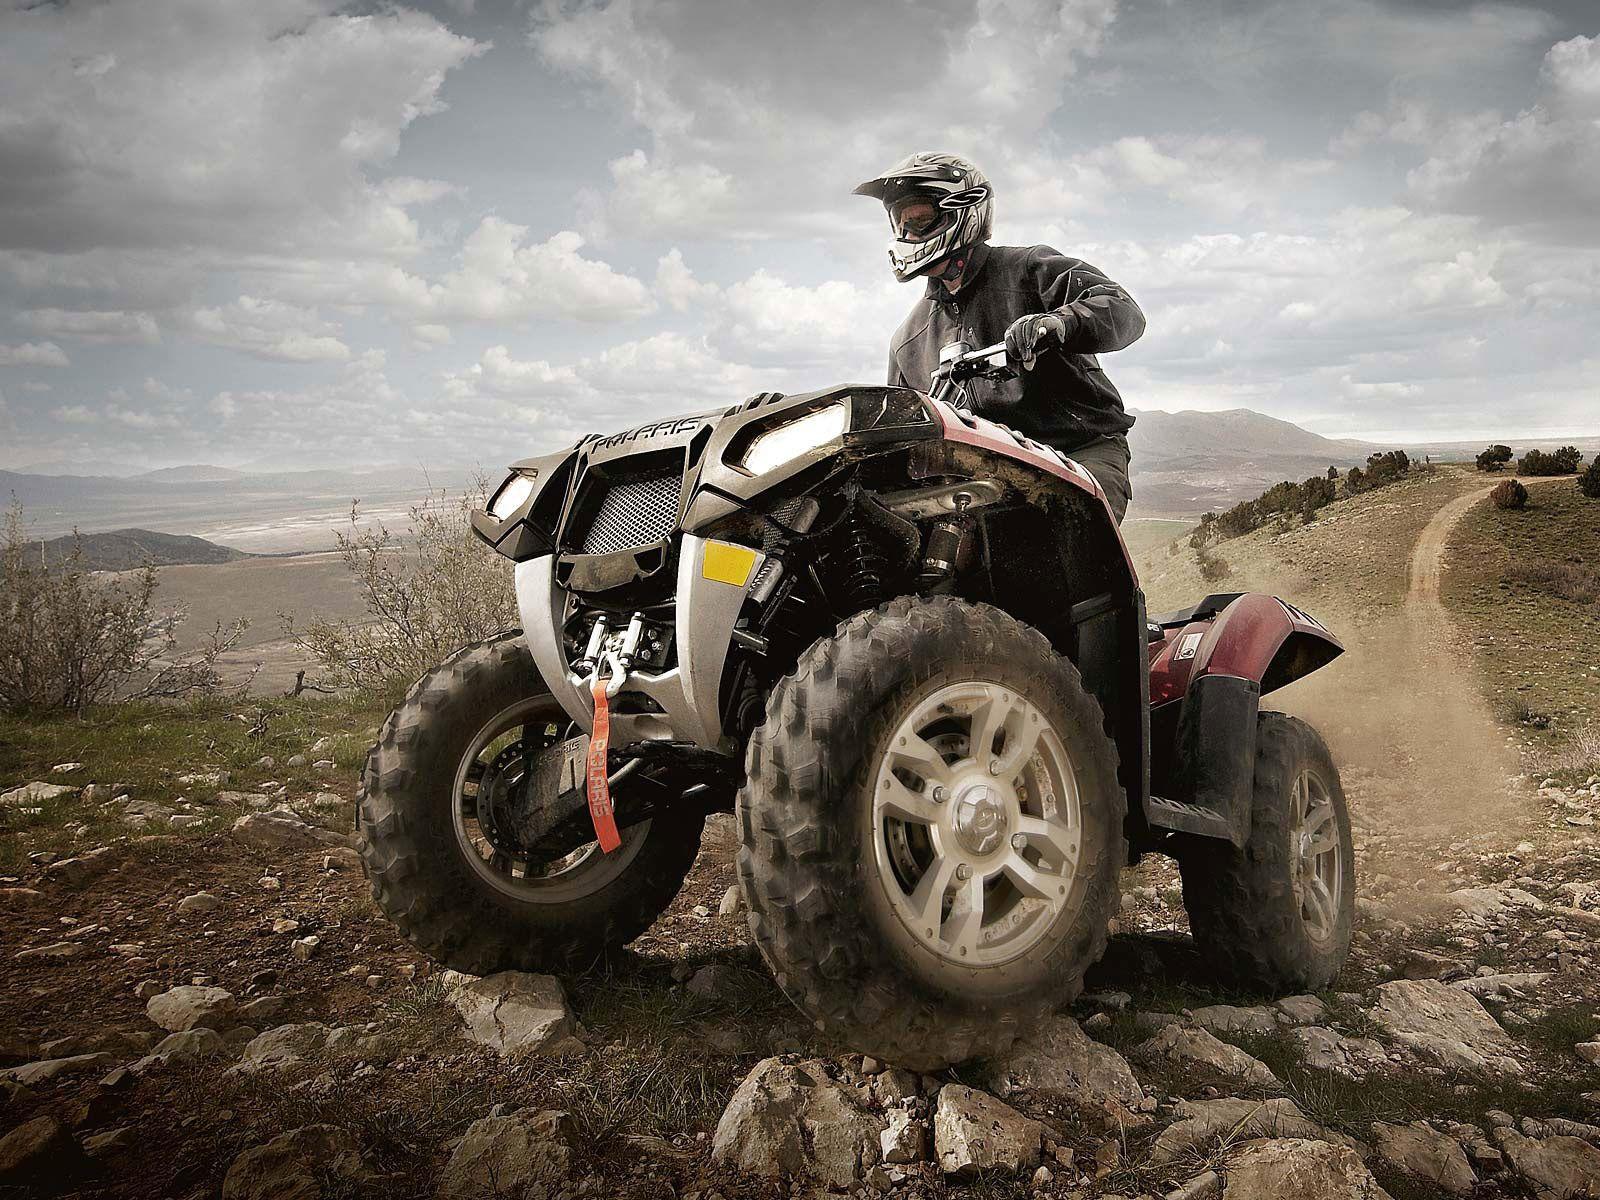 Fourwheeler Wallpapers / Over 7,380 four wheeler pictures to choose